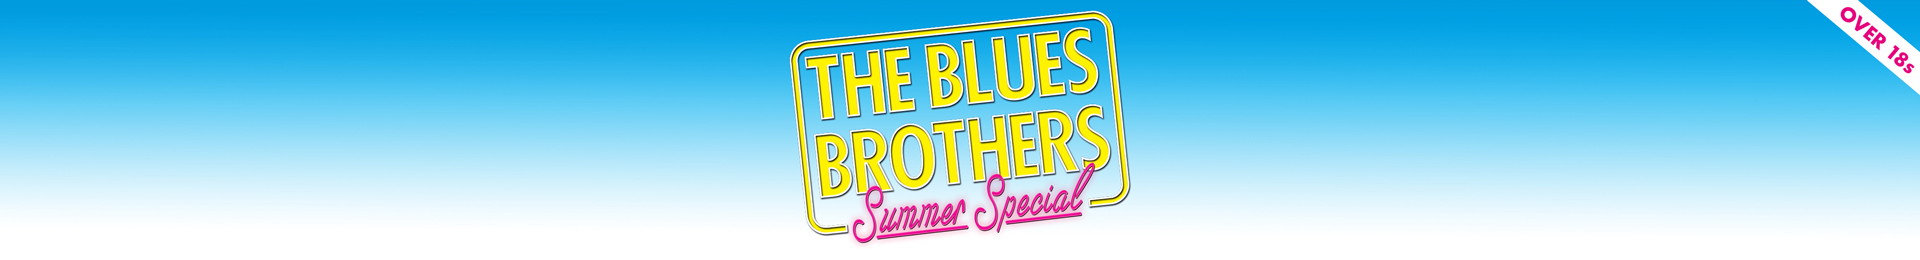 The Blues Brothers – Summer Special banner image